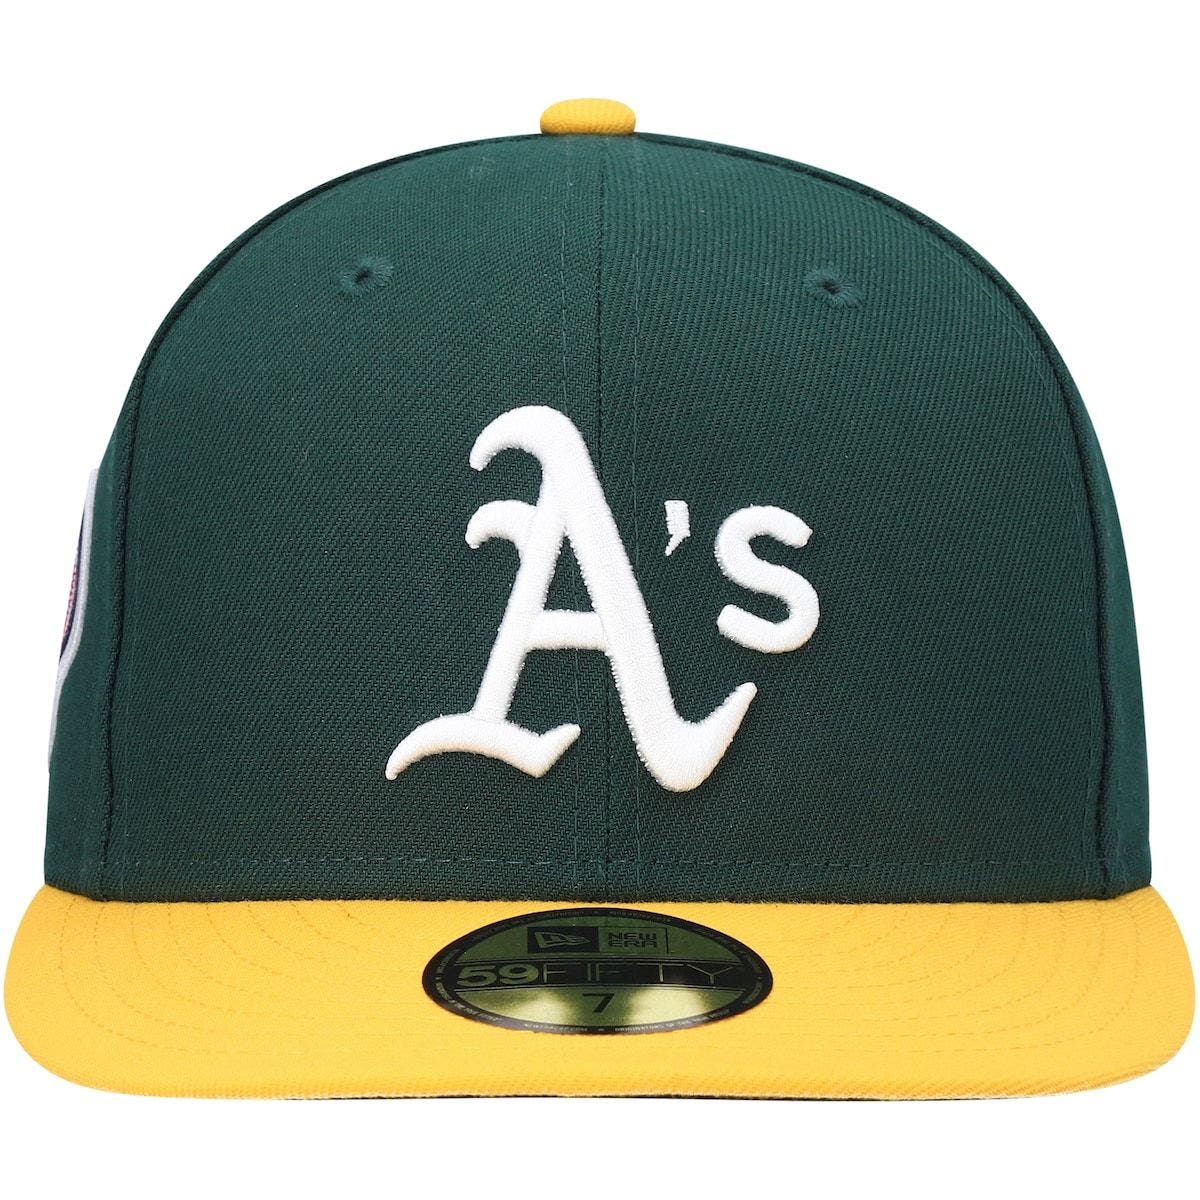 New+EraNew Era Oakland Athletics Black On Black cap 59fifty 5950 Fitted Special Limited Edition 